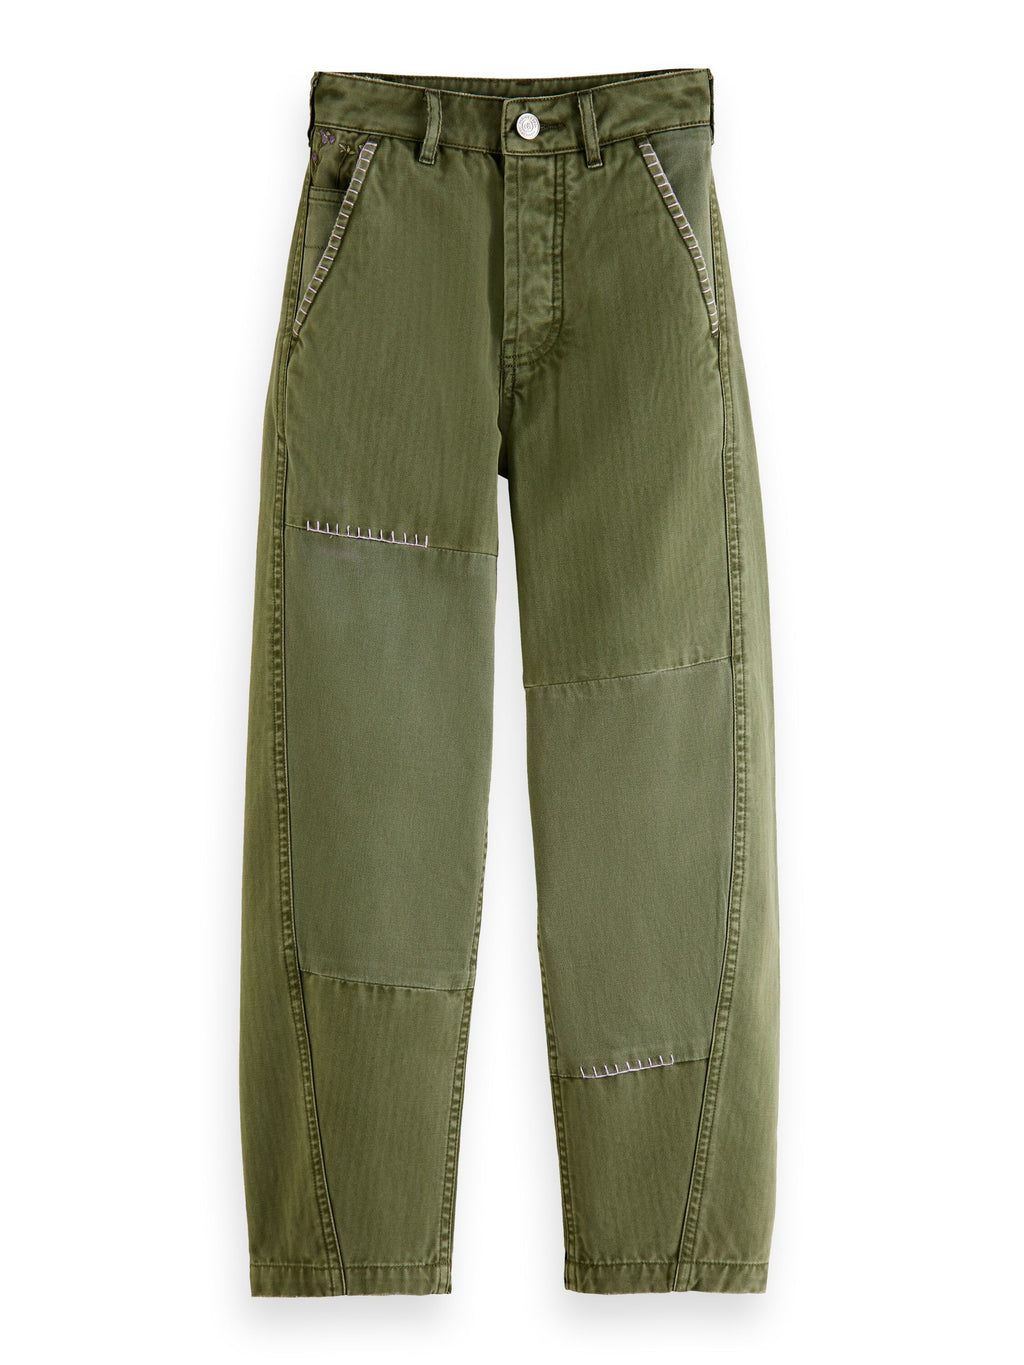 Scotch & Soda The Tide Balloon-Fit Chinos Hem Embroidered - Green